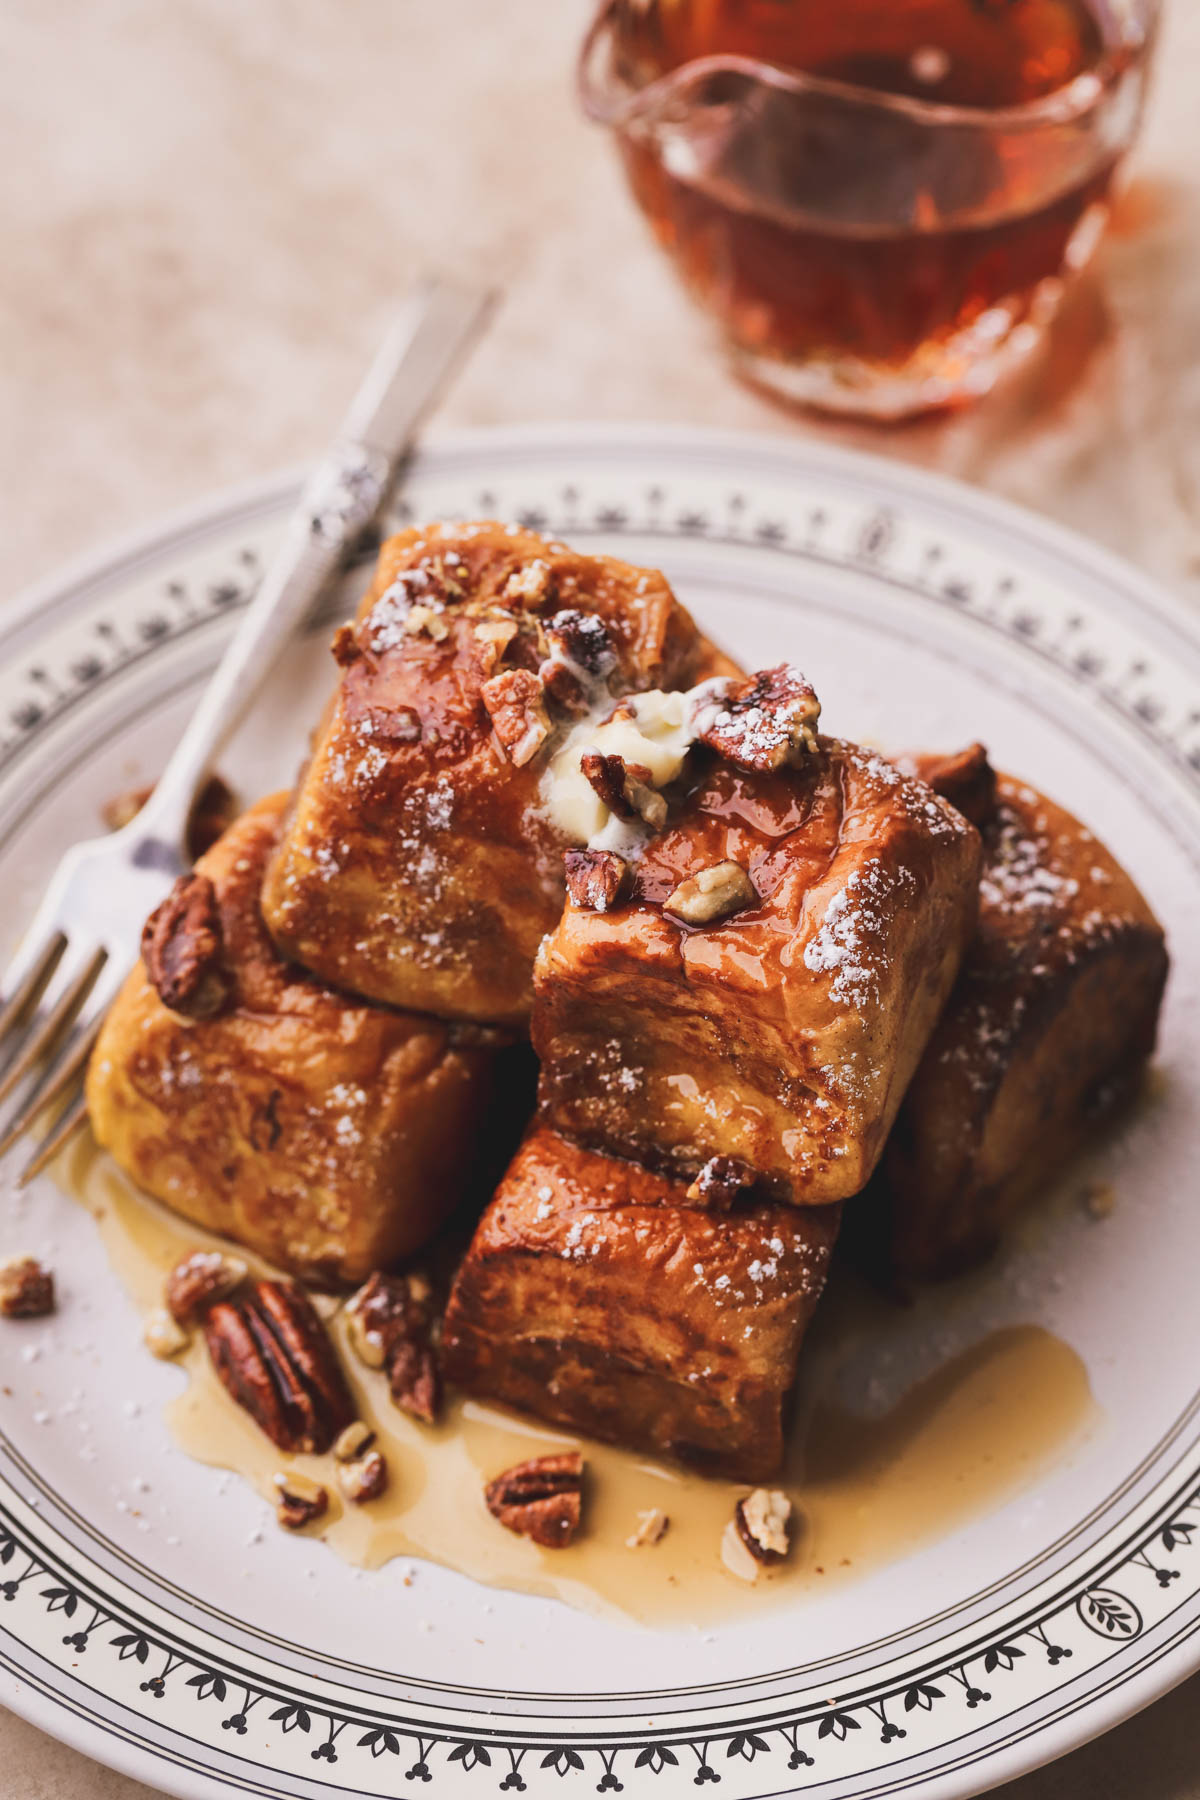 Hawaiian bread French toast flavored with pumpkin spice and drizzled with maple syrup, butter and chopped candied pecans.  